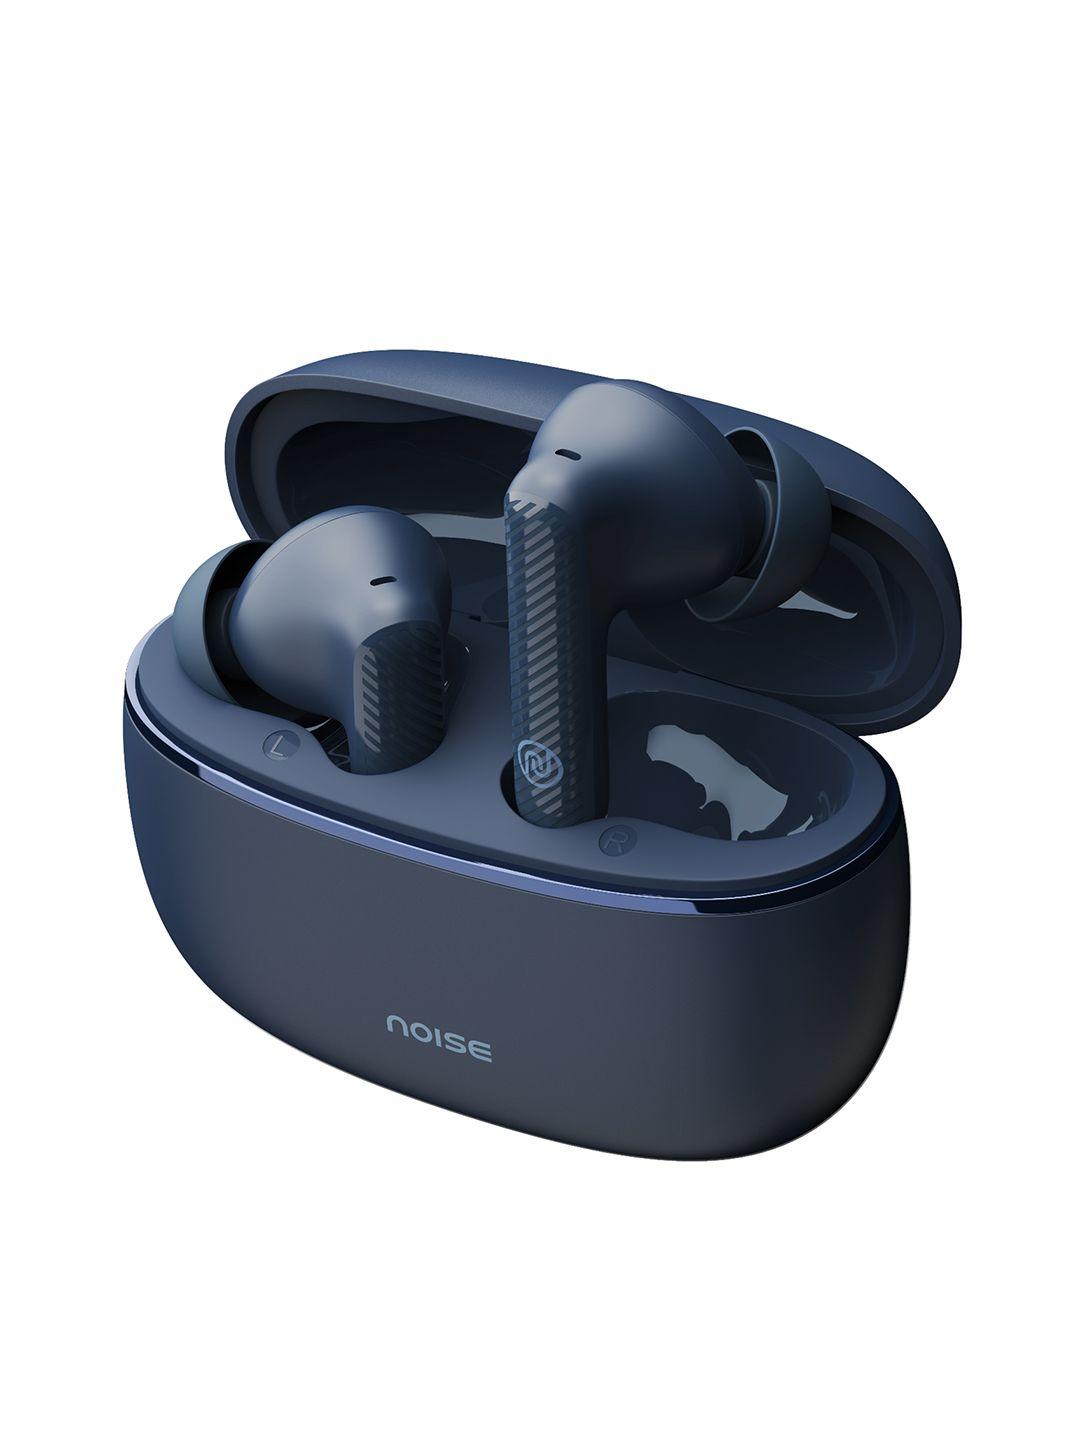 noise aura buds truly wireless earbuds with 60h playtime and quad mic enc - aura blue